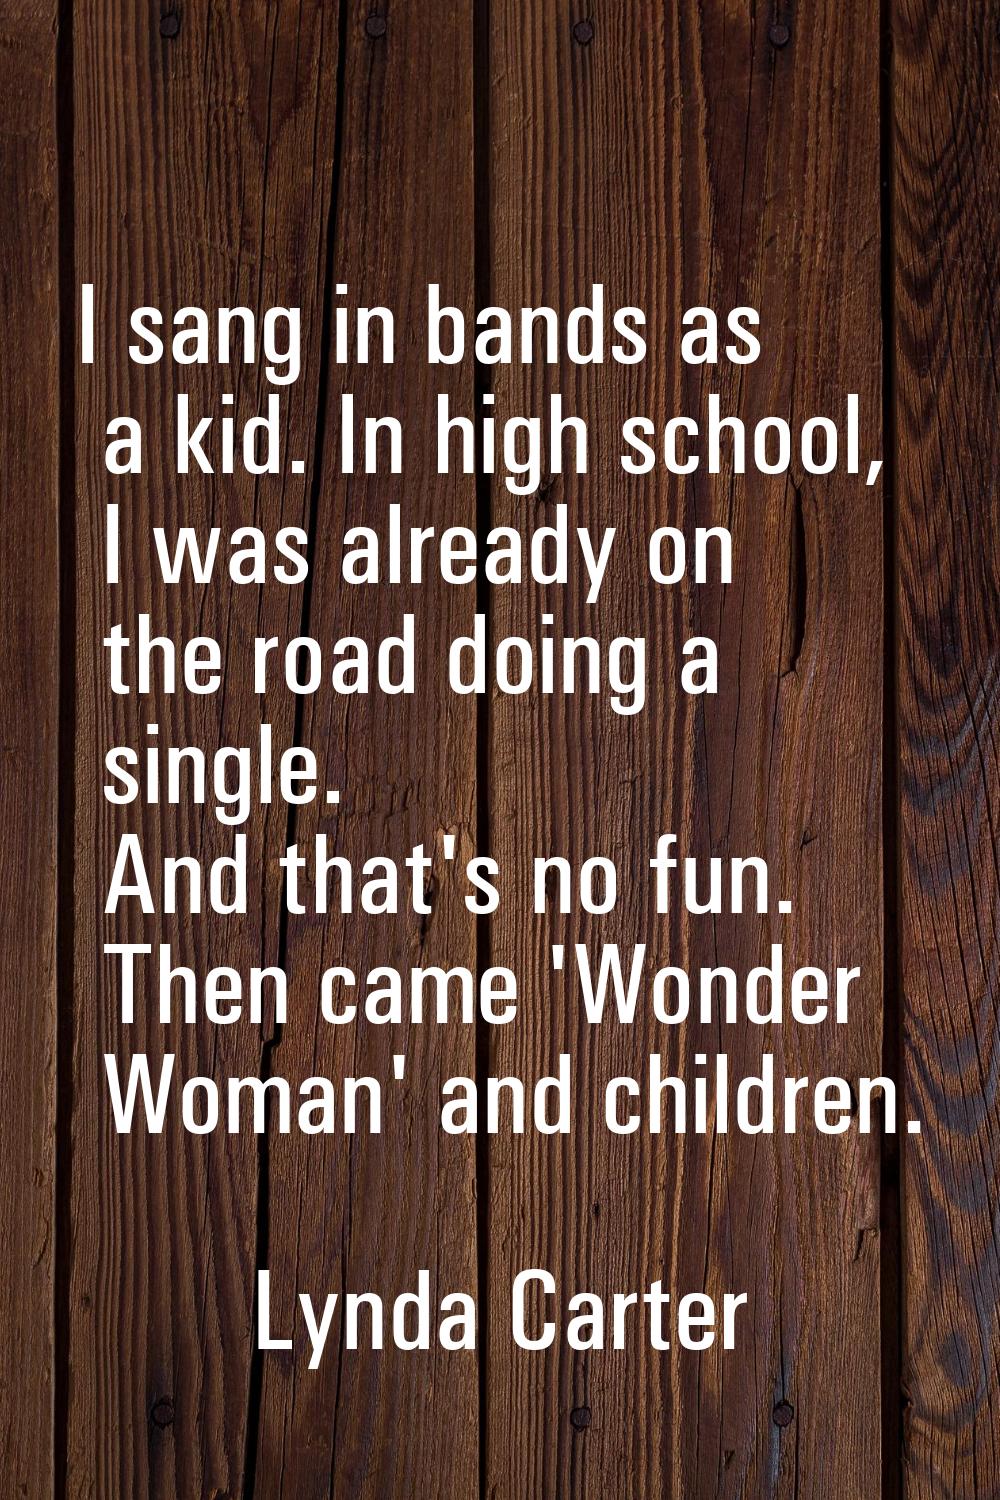 I sang in bands as a kid. In high school, I was already on the road doing a single. And that's no f